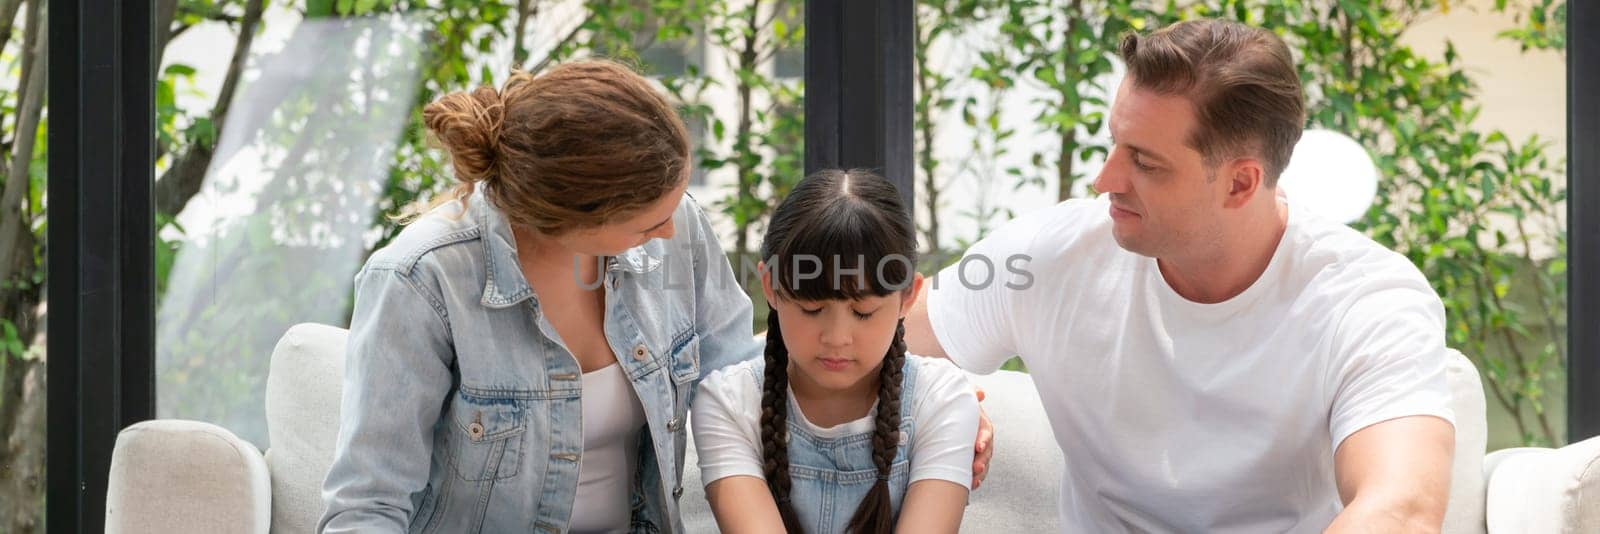 Parents comforting their daughter with loving hug, helping her feel secure and protected from fear, rest her head on shoulder. Happy family love and child care support concept. Panorama Synchronos